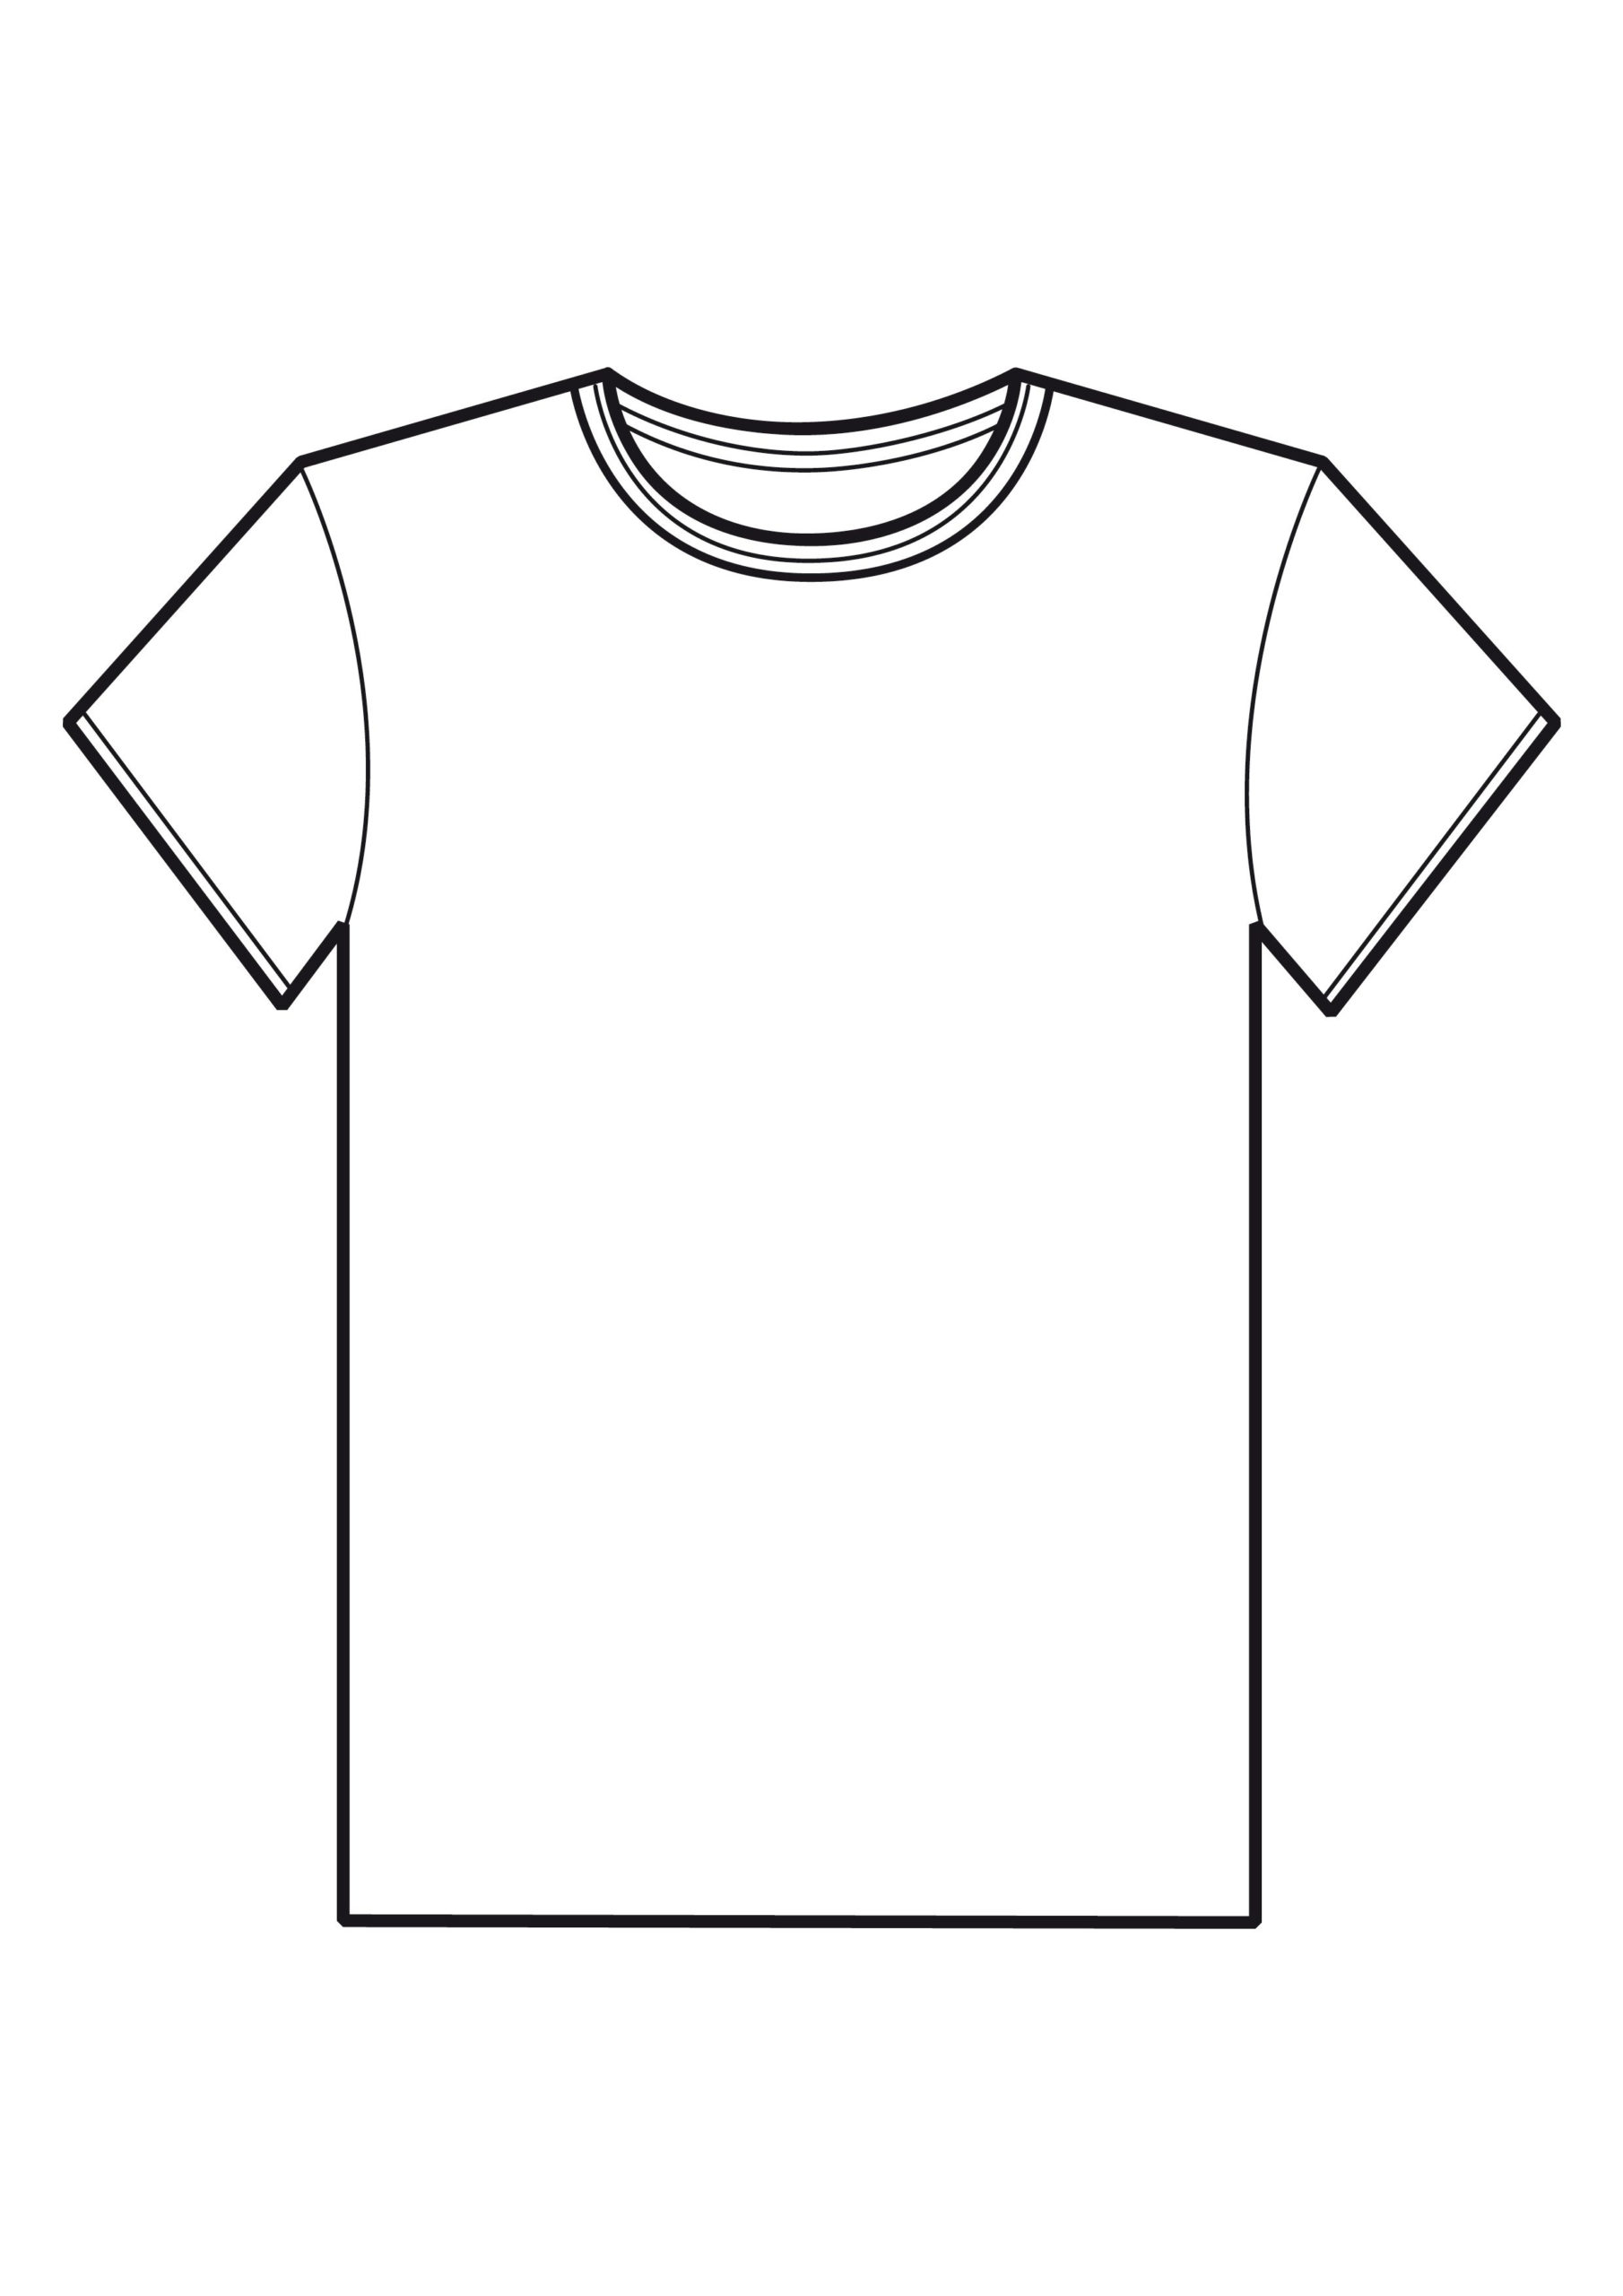 Blank T Shirt Template For Colouring – Clipart Best with regard to ...